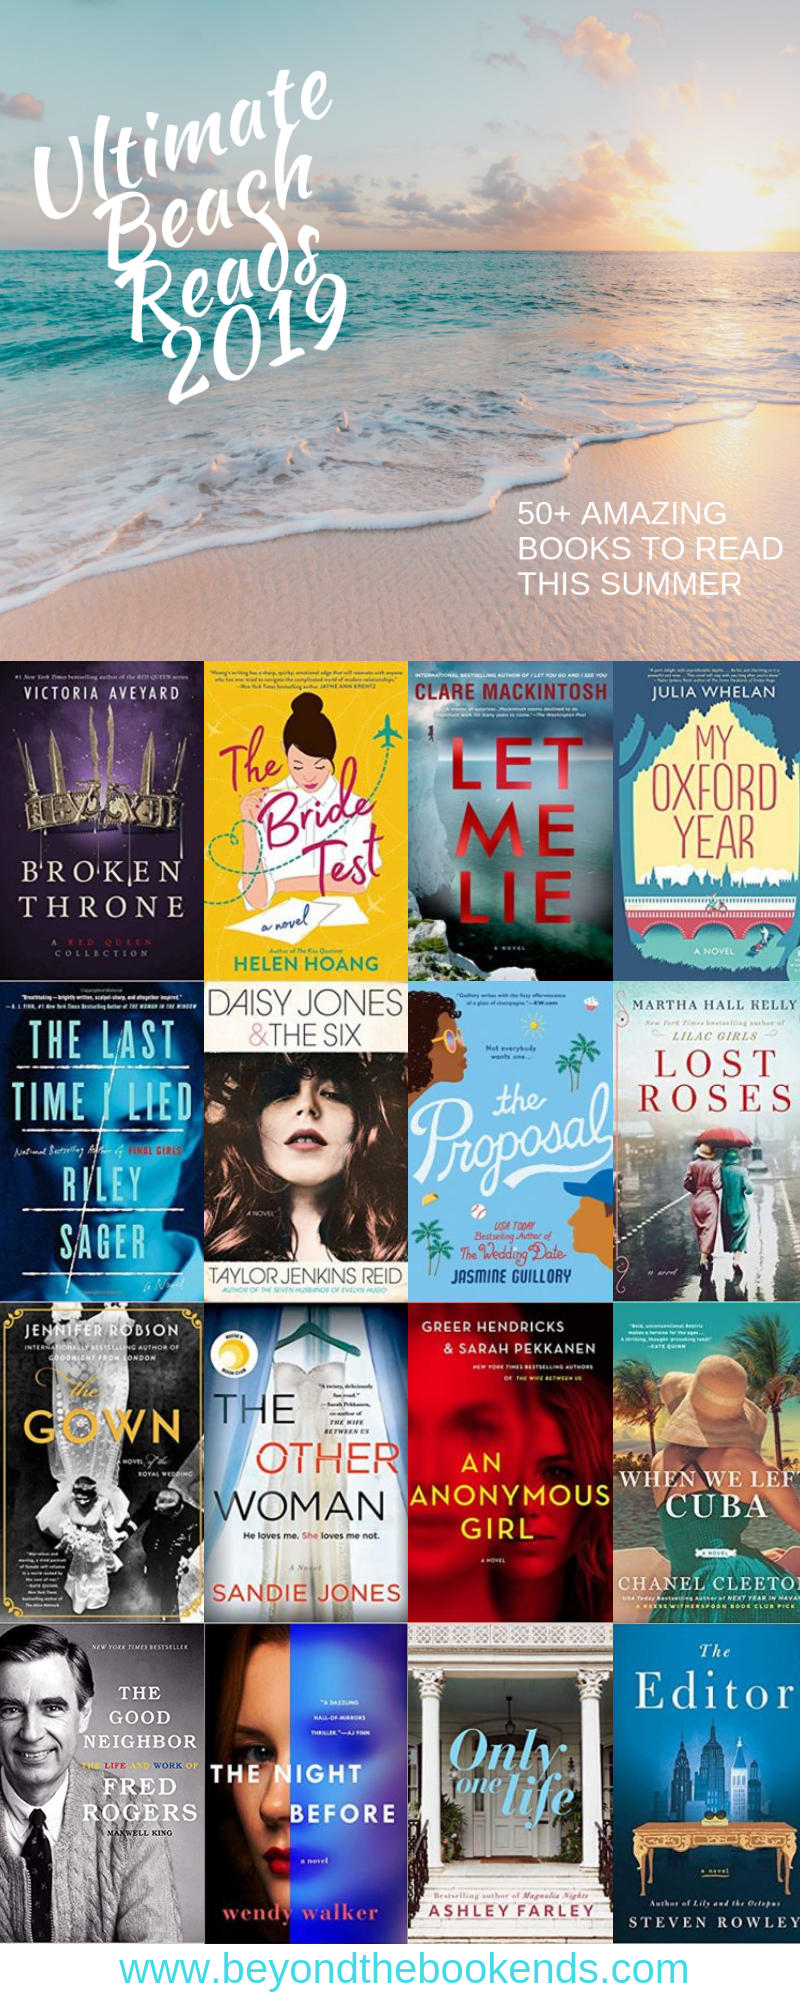 Pin Now, Read Later! 2019 Ultimate Beach Reads! Mysteries, Thrillers, Young Adult Reads, Historical Fiction, Family Dramas, Fiction and Lighter Fare all make this list! There is truly something for everyone to read on the beach this summer!